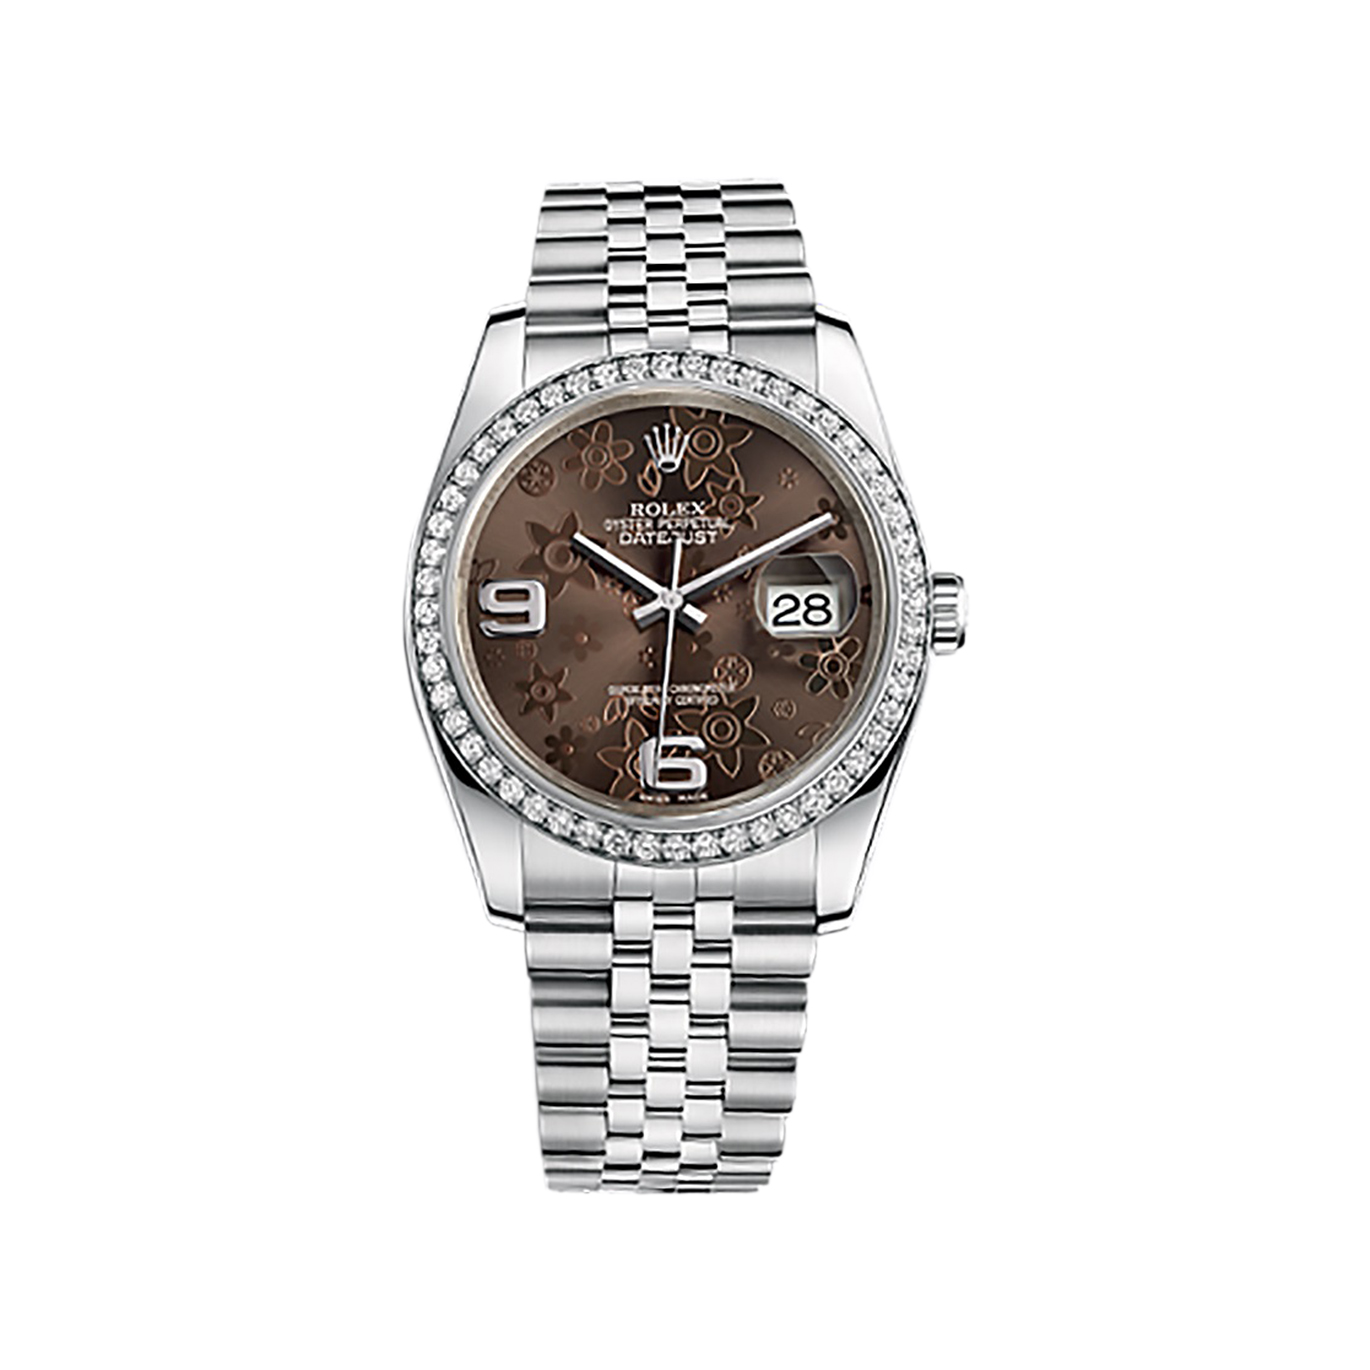 Datejust 36 116244 White Gold & Stainless Steel Watch (Bronze Floral Motif)